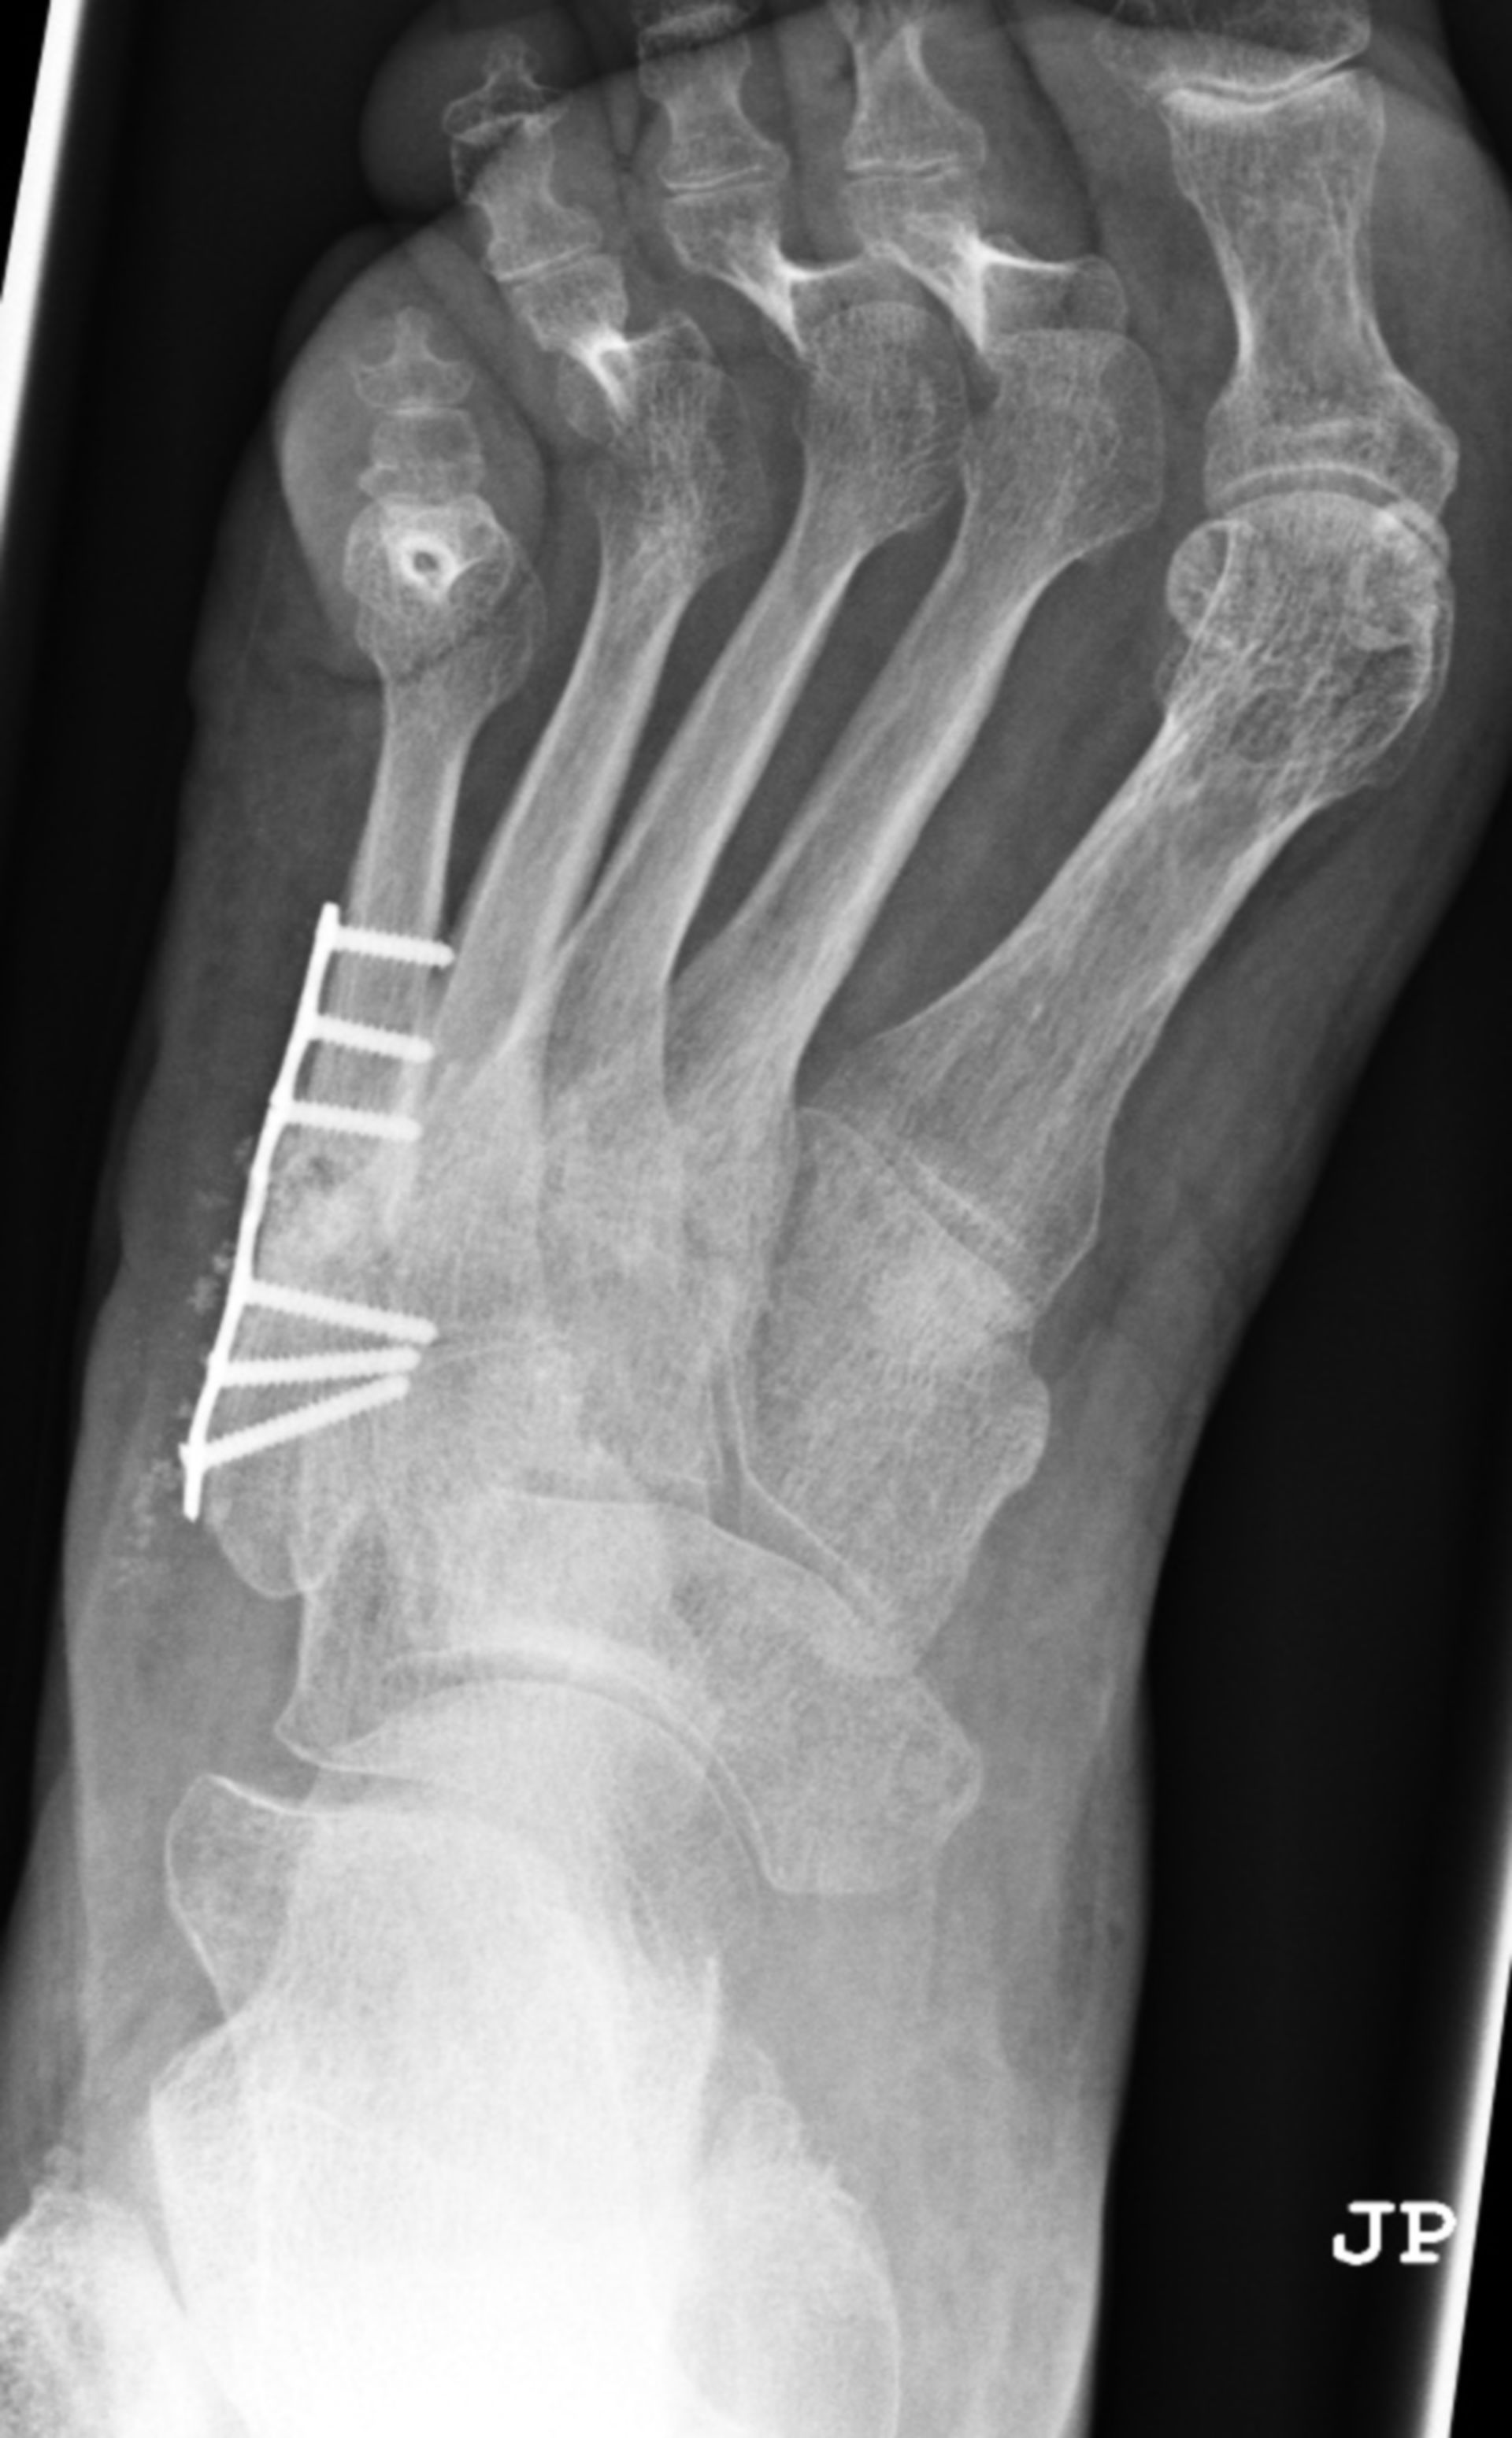 Metatarsal fracture – plate osteosynthesis